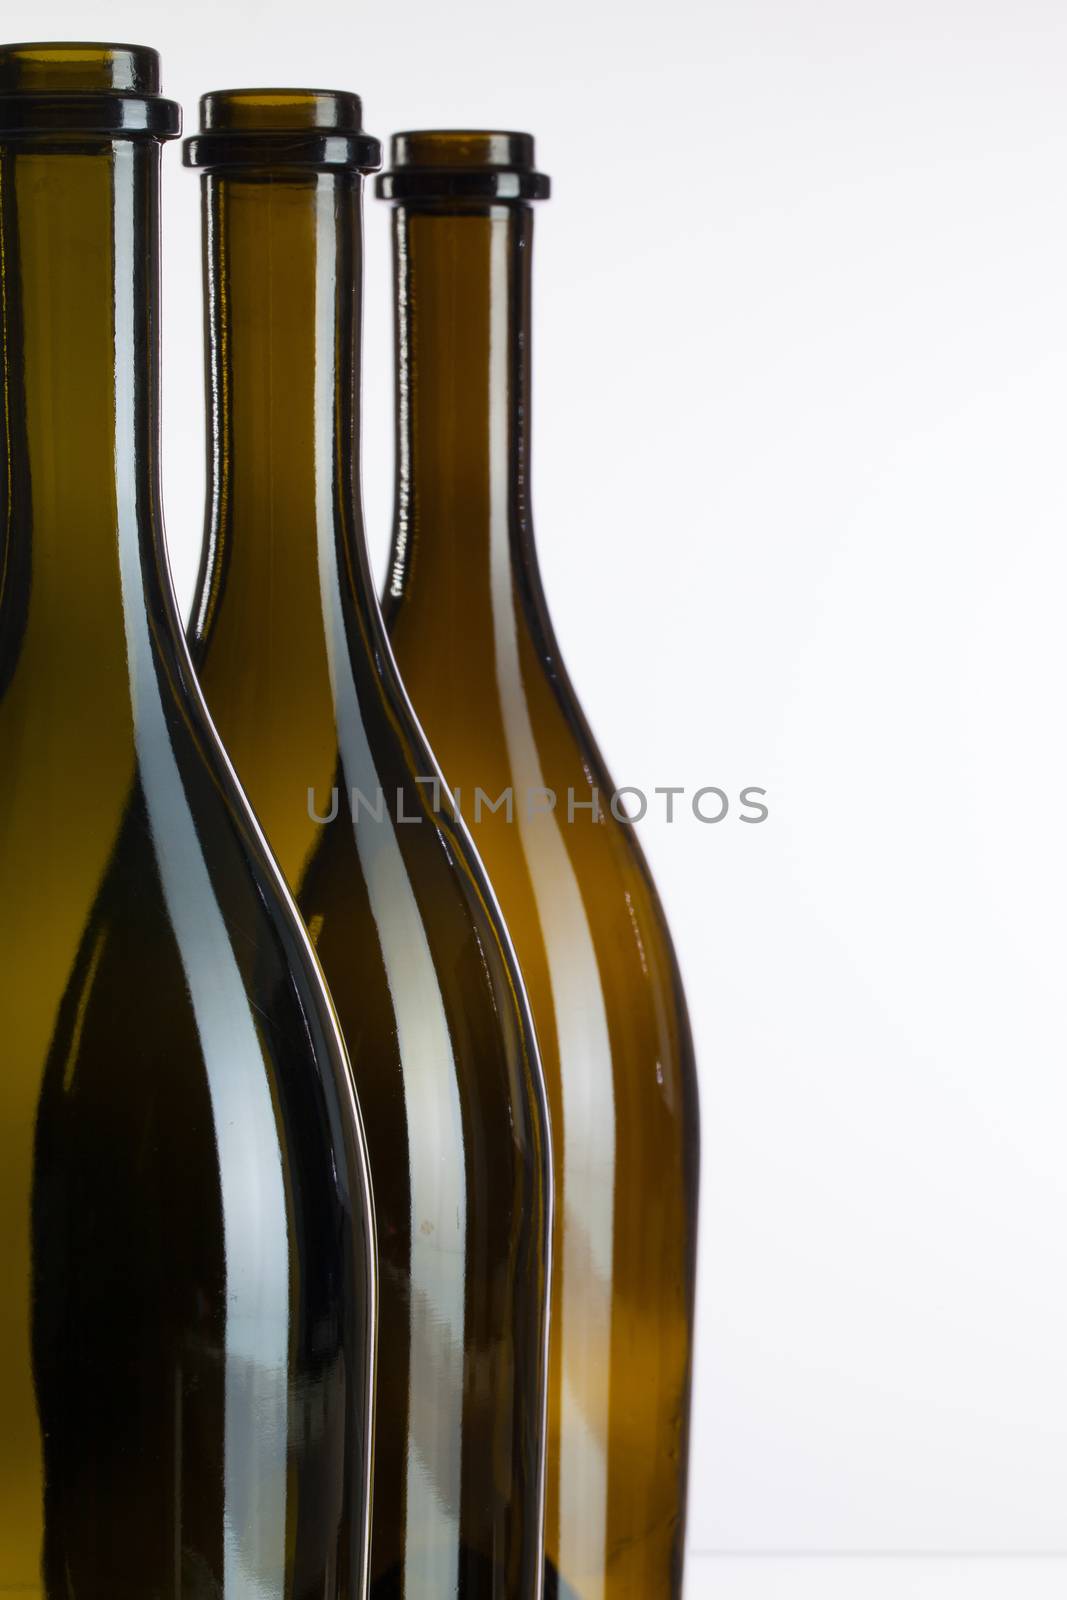 Three empty bottles of wine on a glass table